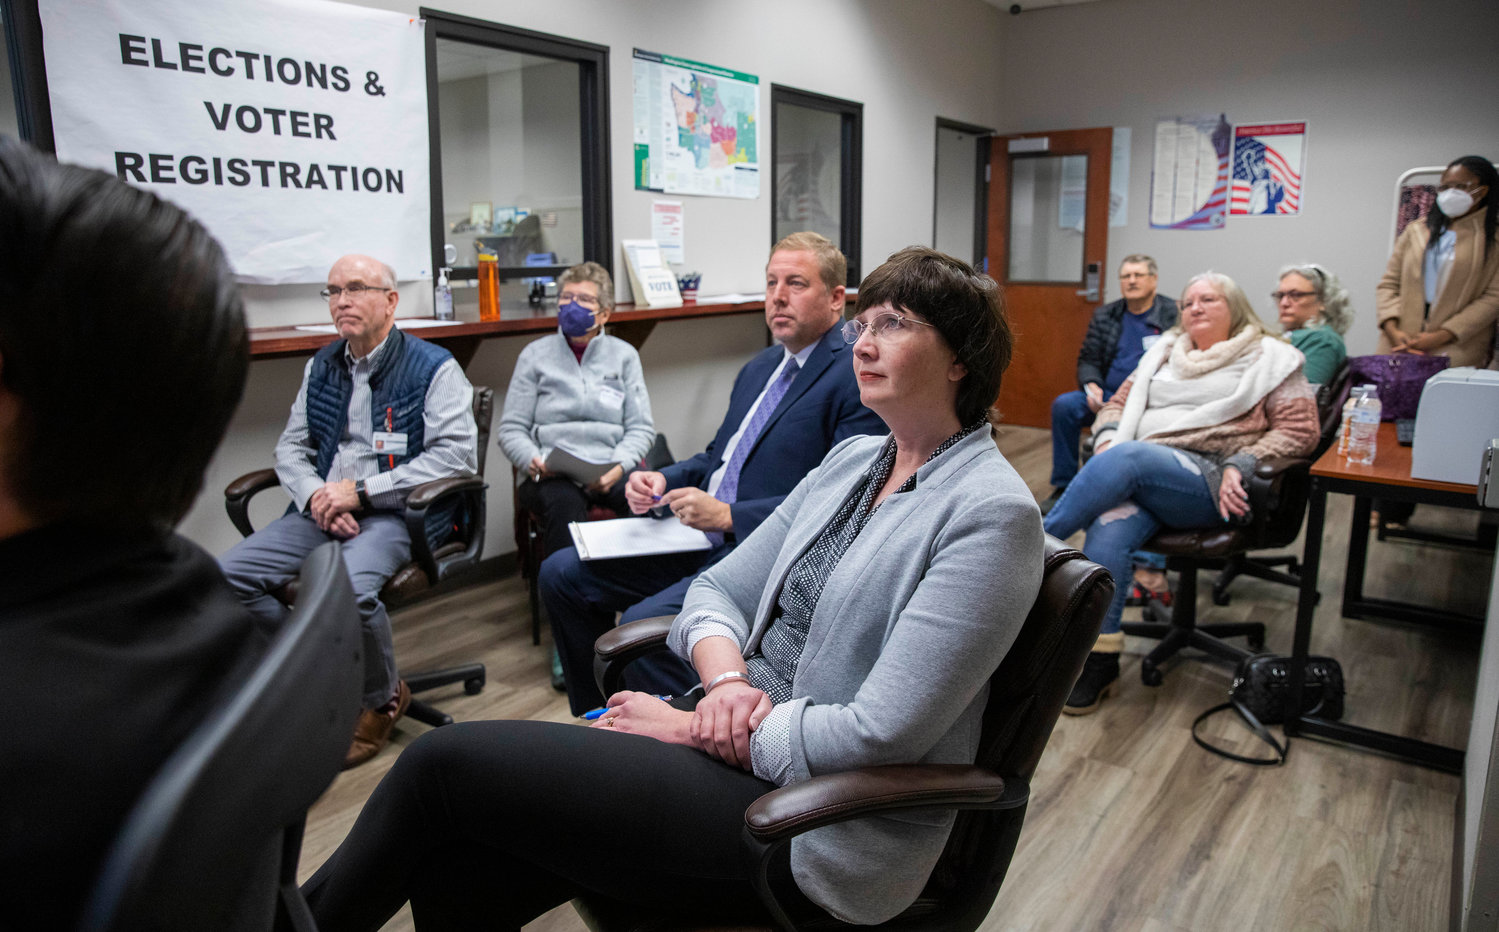 Commissioner Lindsey Pollock is joined by Auditor Larry Grove and other observers during a machine recount of votes Friday morning in Chehalis.